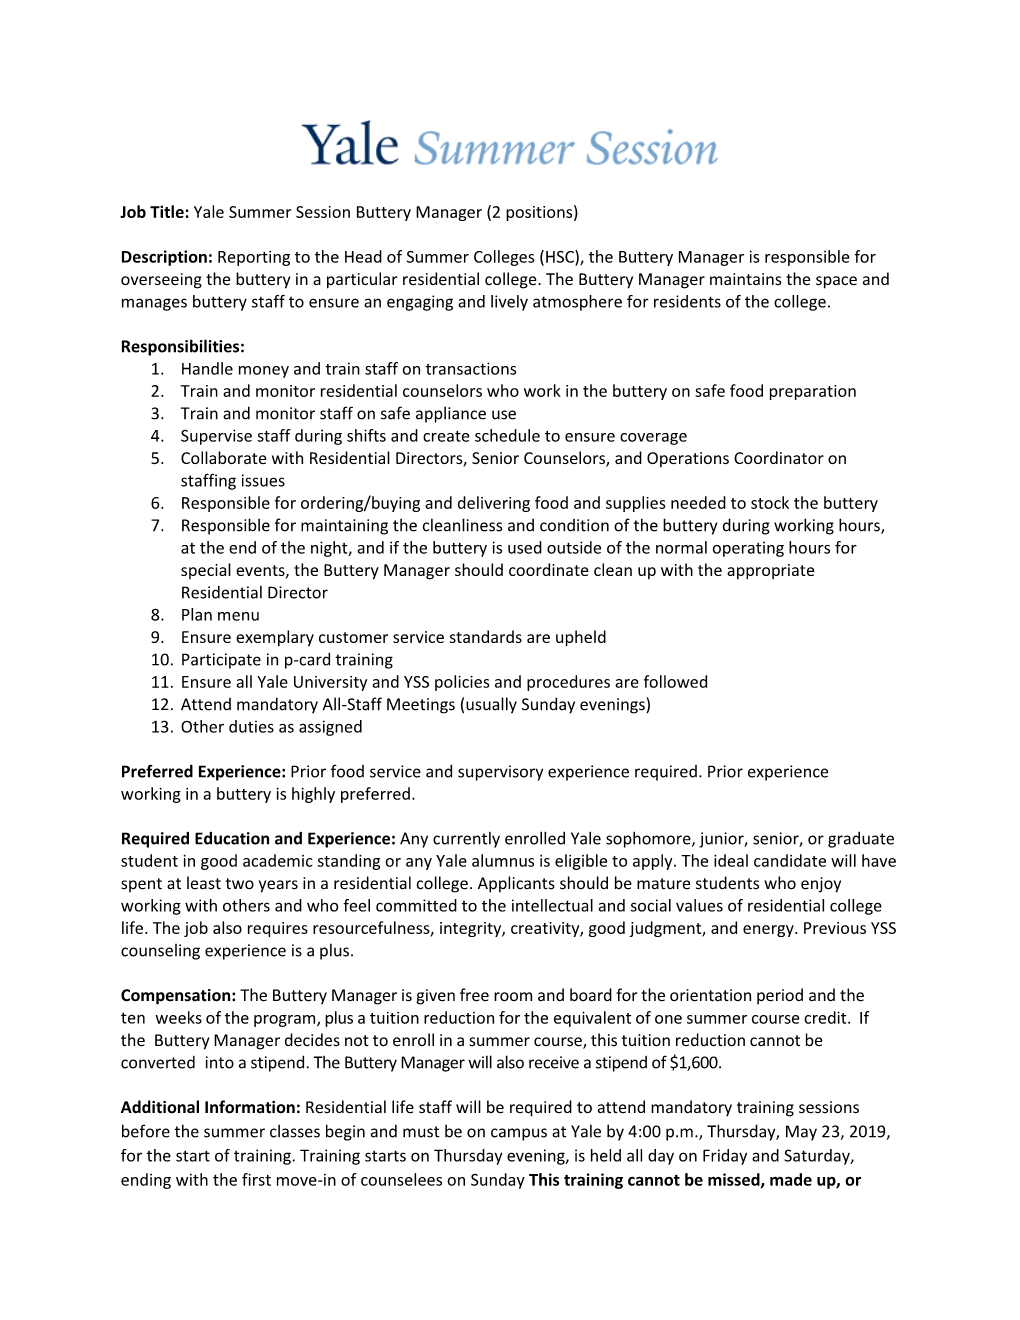 Yale Summer Session Buttery Manager (2 Positions)